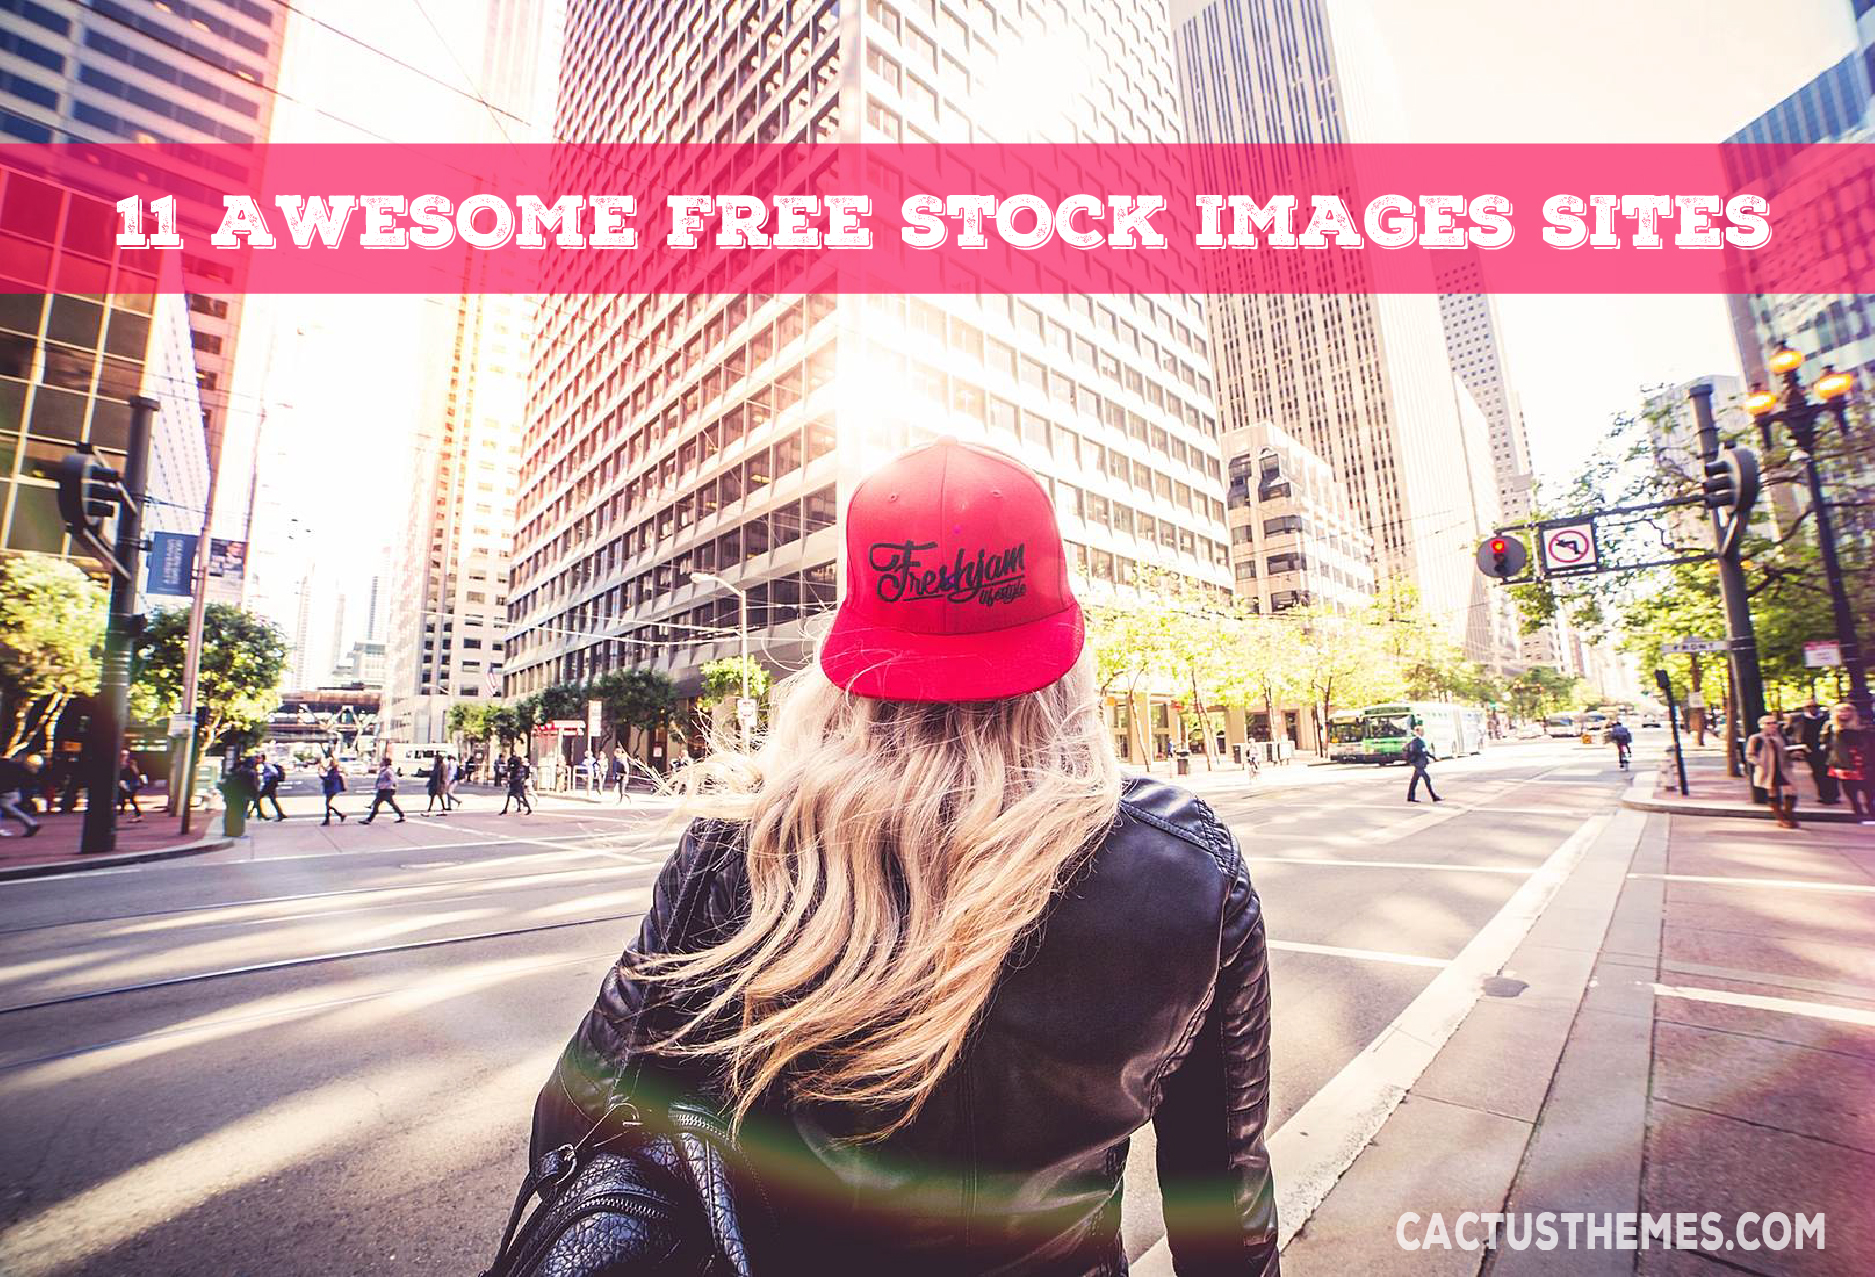 11 AWESOME FREE STOCK IMAGES SITES Free stock images are extremely difficult to find …